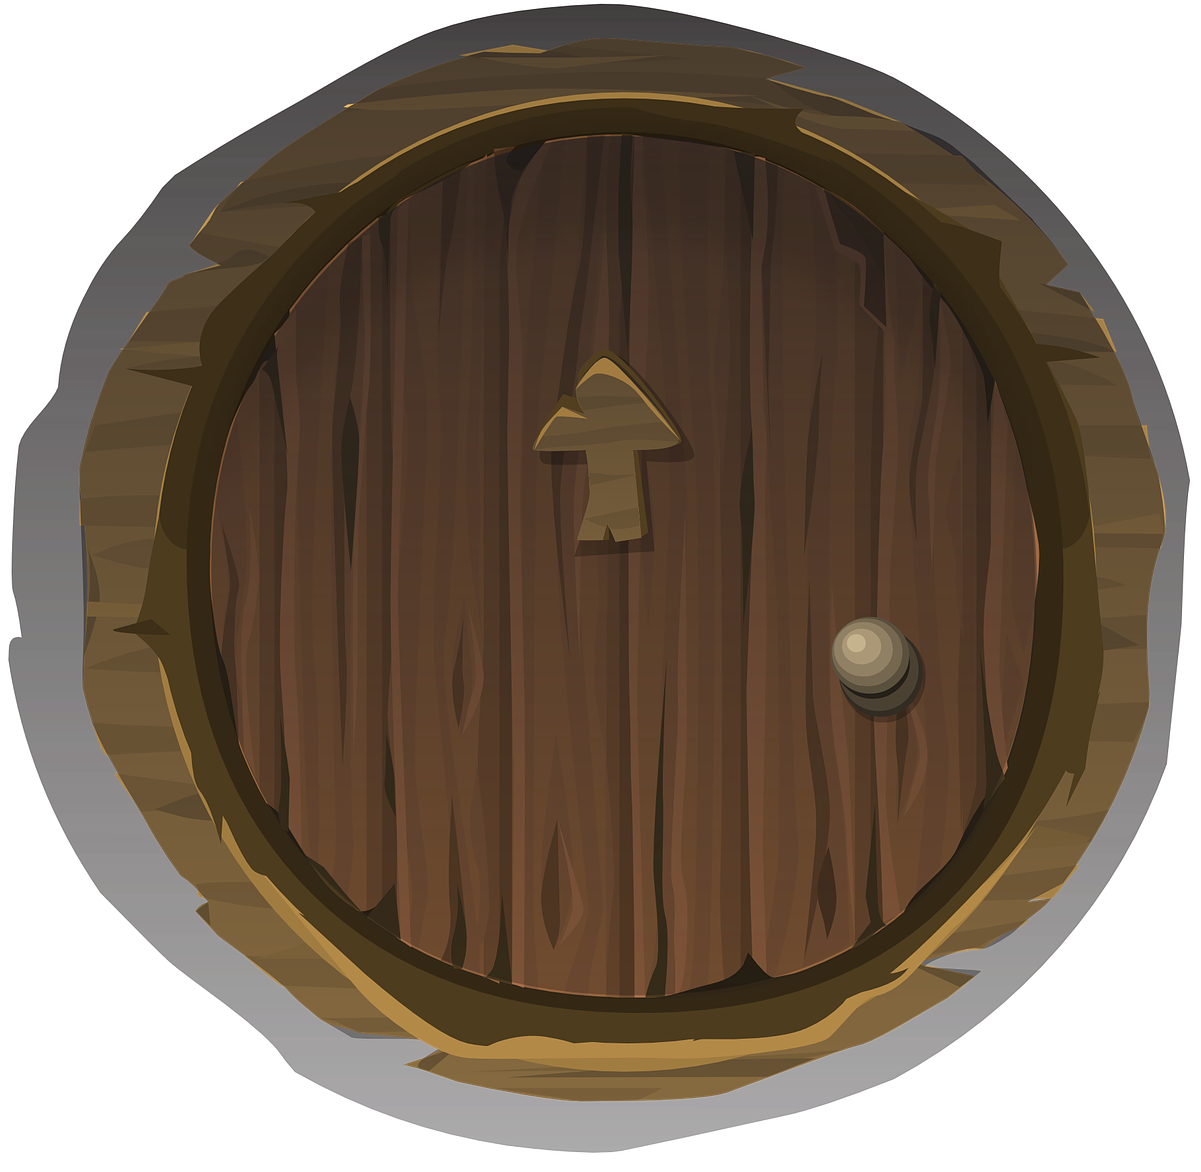 A Wooden Door With A Knob